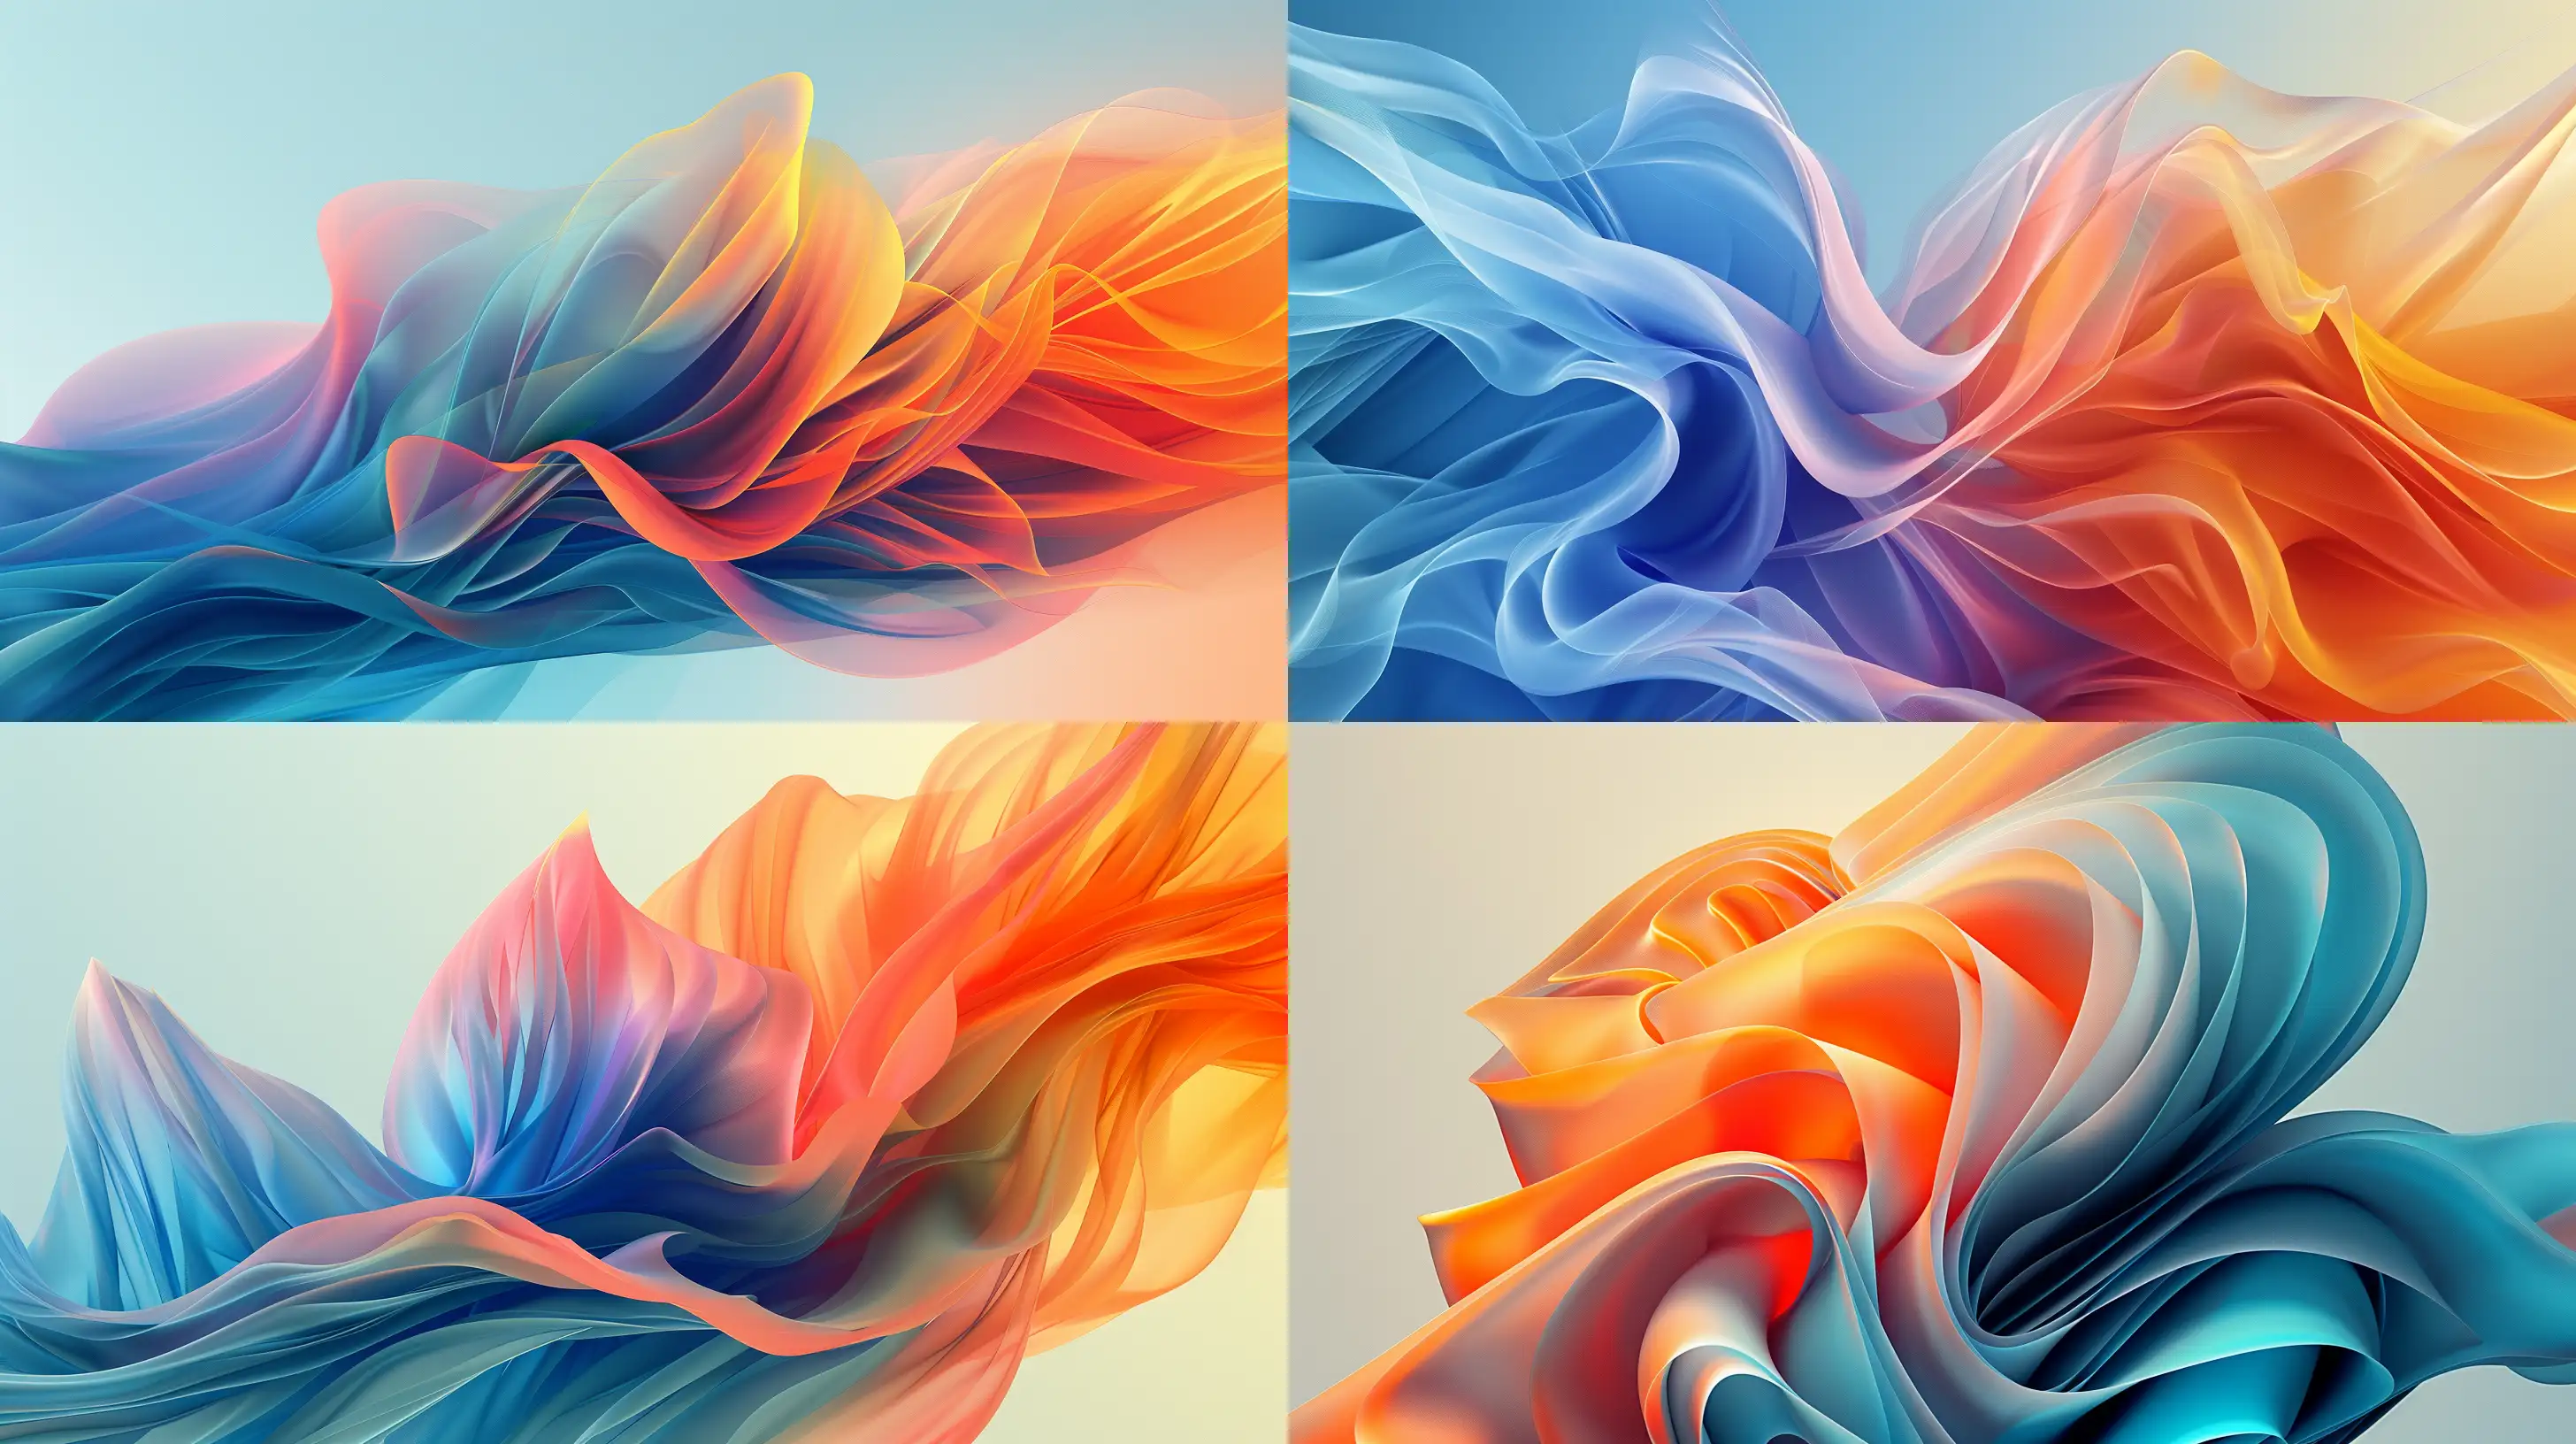 Create an abstract, high-resolution image in wide format that captures the essence of flowing geometric shapes with a vibrant gradient from cool blues to warm oranges, akin to the reference provided. The image should feature a dynamic, fluid composition that resembles a blossoming flower, with layers that suggest depth and movement. Incorporate a designated area in the lower right corner for text, specifically for a watermark or logo. The design should be modern, clean, and versatile for various applications in a digital content library --ar 16:9